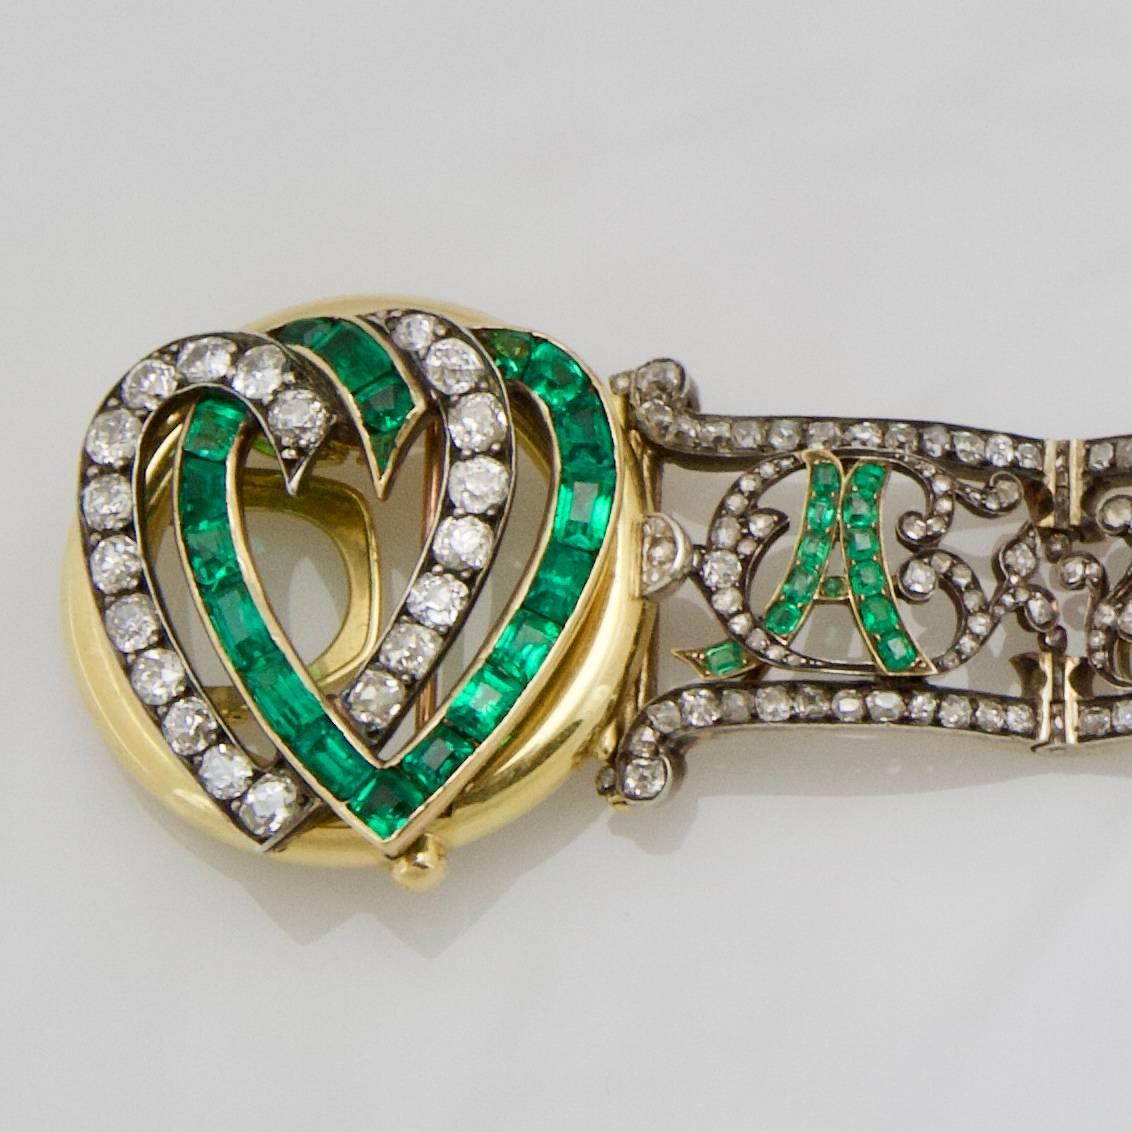 Romantic 19th Century of Saxony Historical and Royal Emeralds and Diamonds Bracelet 1853 For Sale